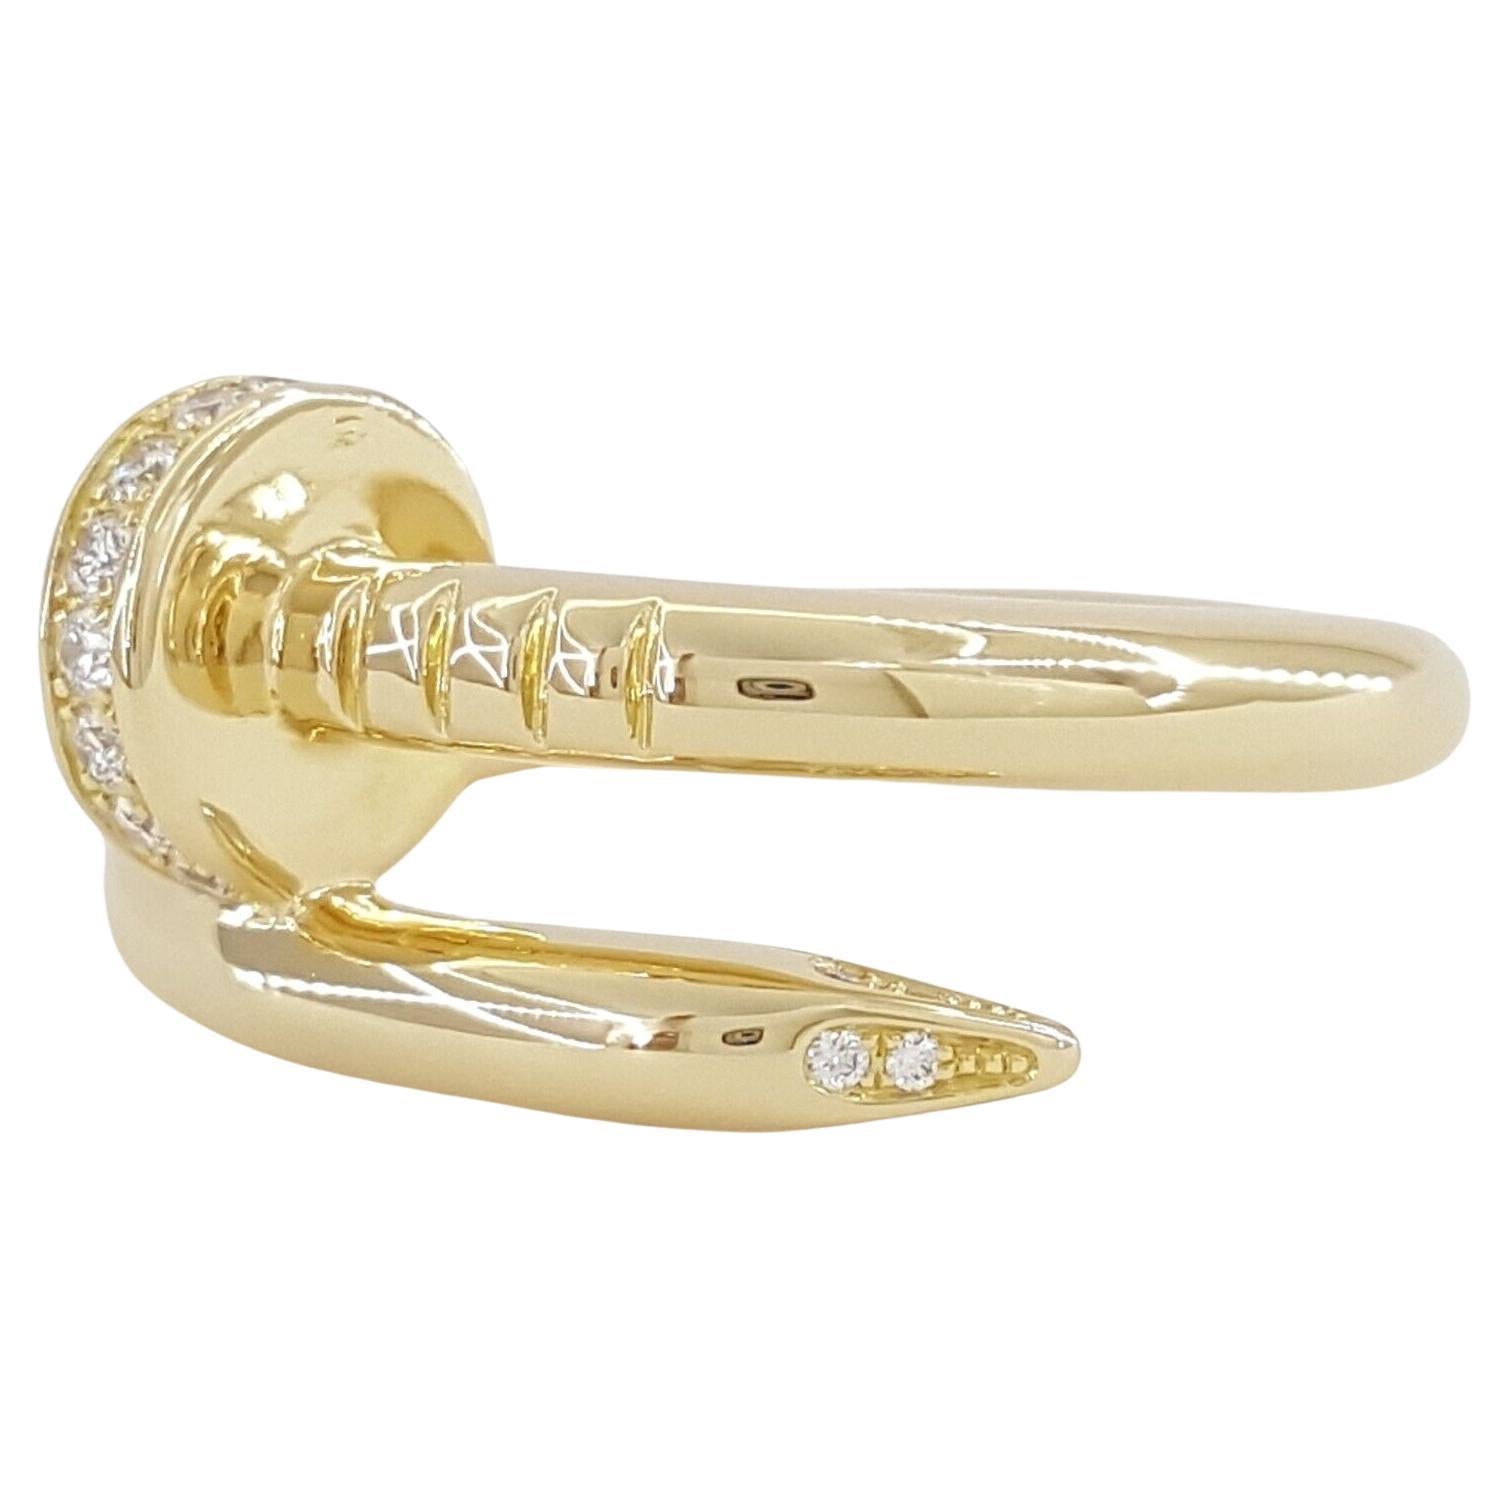 This Cartier Juste un Clou ring is a remarkable example of luxury and iconic design, crafted in sumptuous 18K yellow gold. The ring, weighing 7.5 grams, boasts a solid and substantial feel, indicative of its high quality and Cartier's attention to